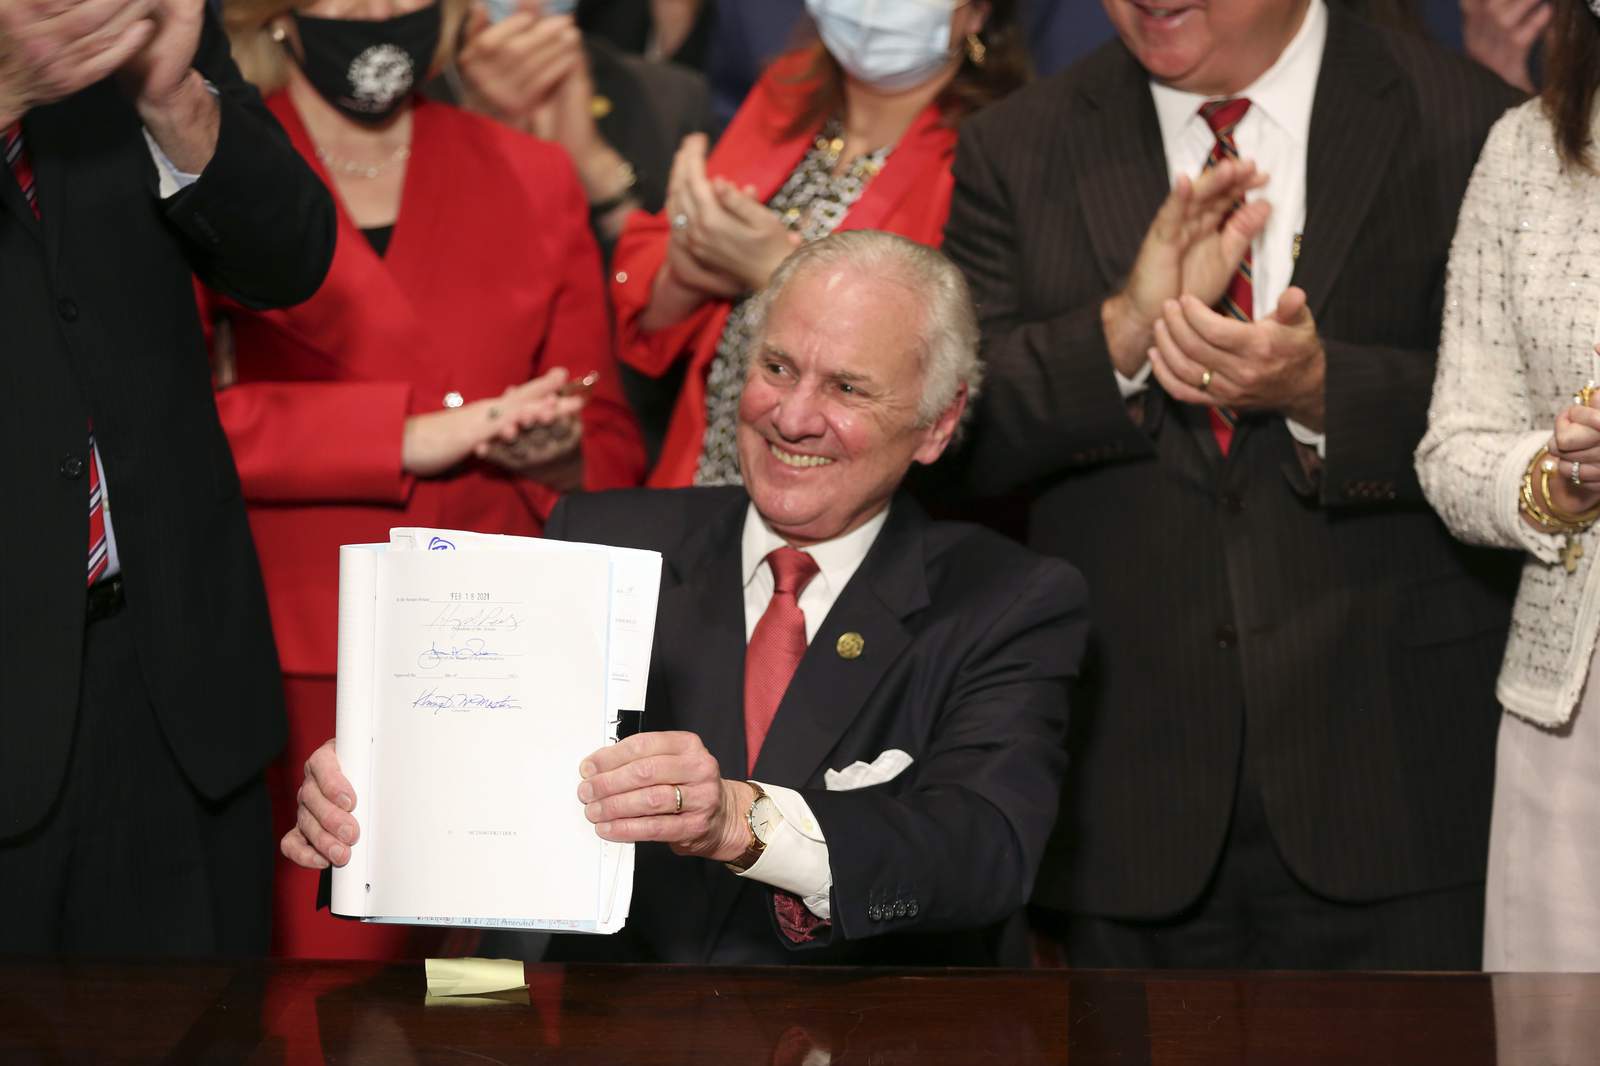 South Carolina abortion law suspended 1 day after passage